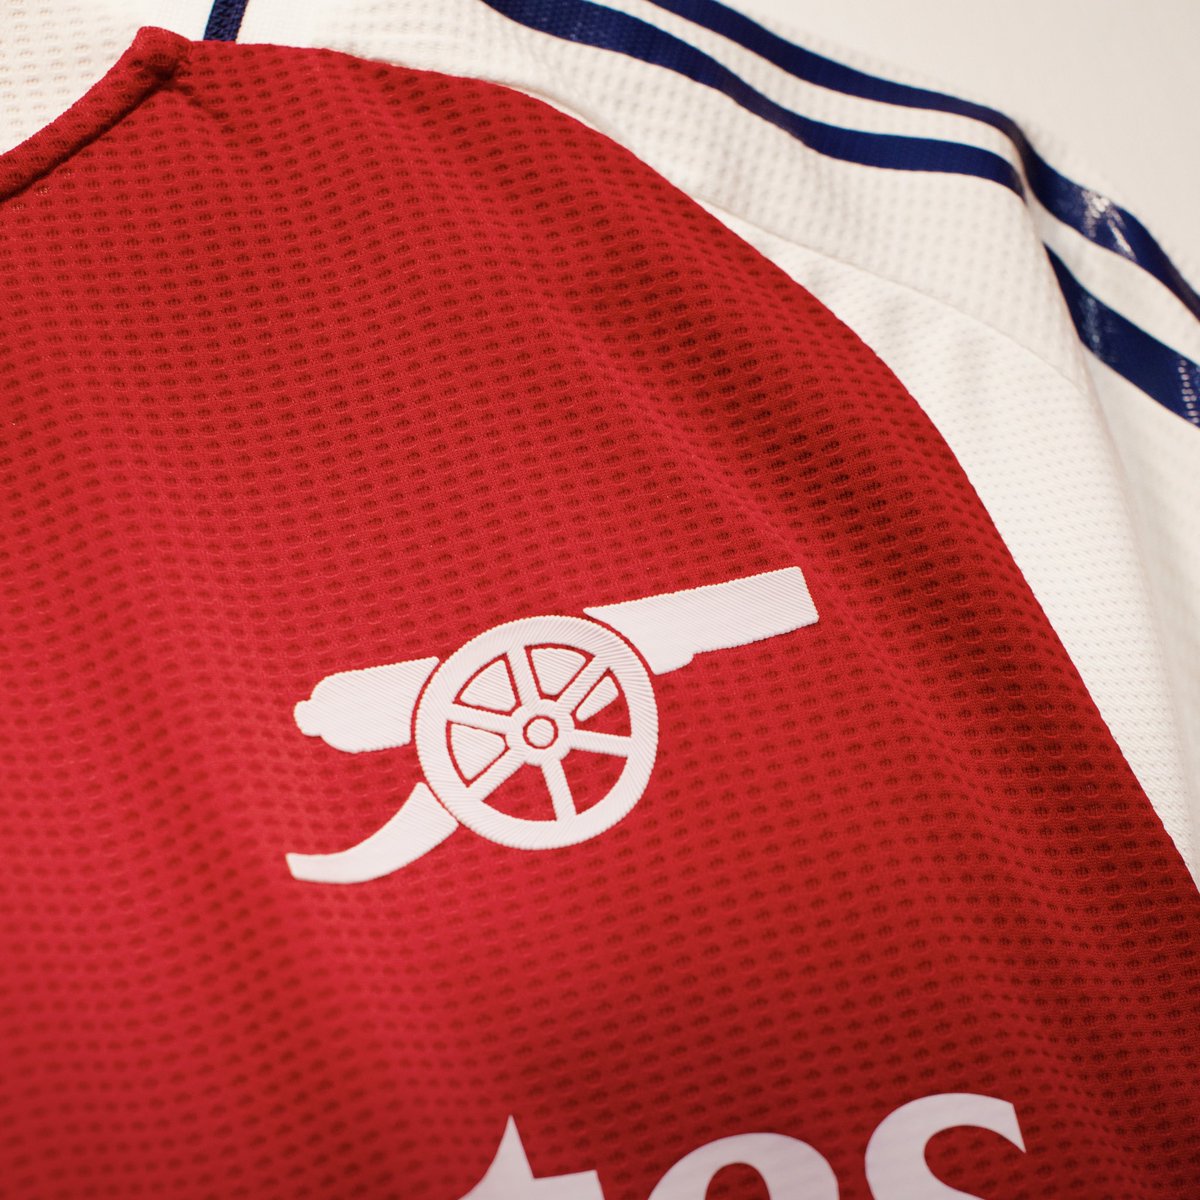 We are The Arsenal 🔴

Introducing the new 24/25 Arsenal Home jersey. 👉👉 adidas.com/arsenal